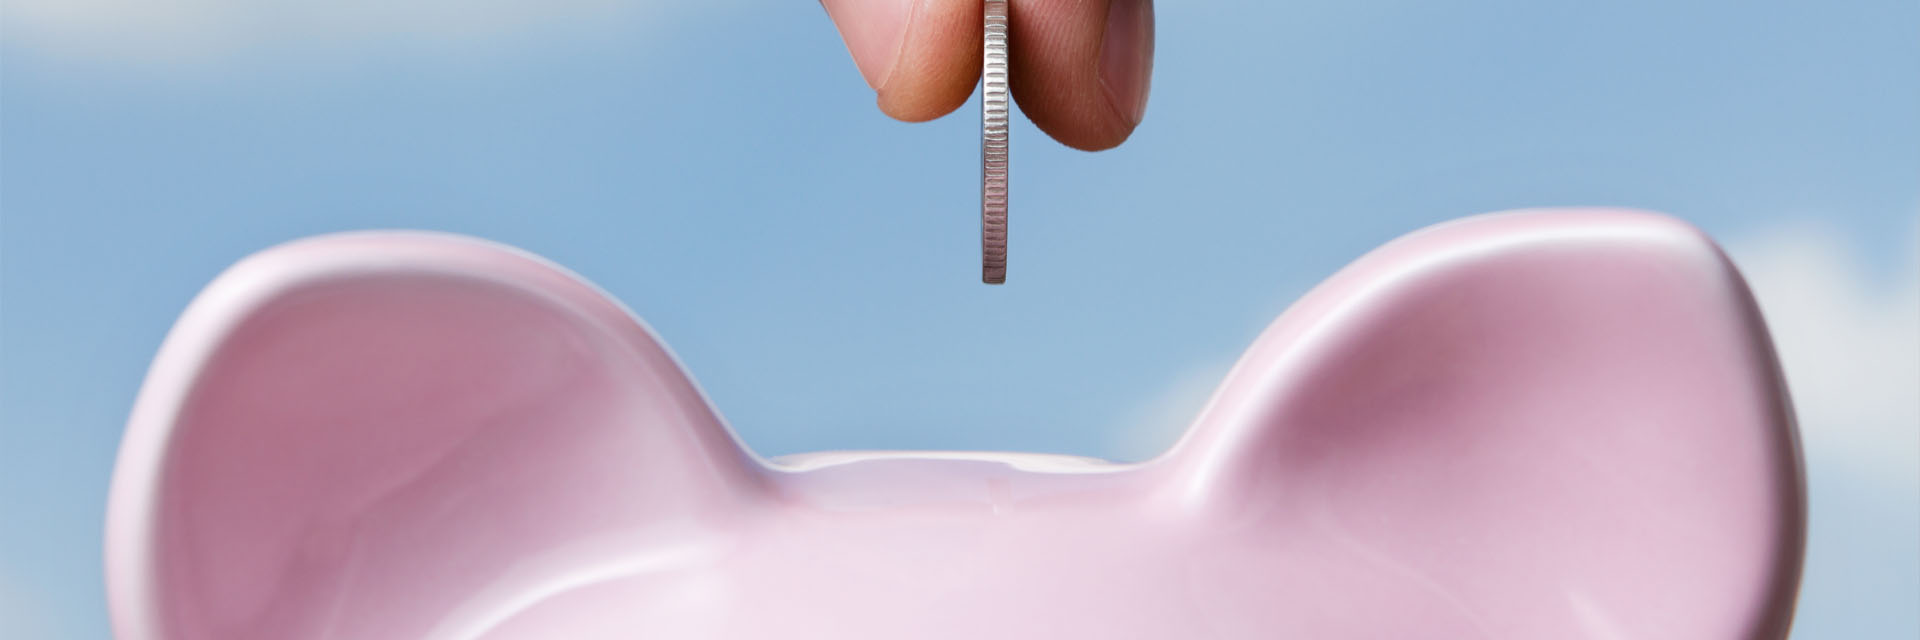 Image showing a close up of hand putting a coin in a piggy bank